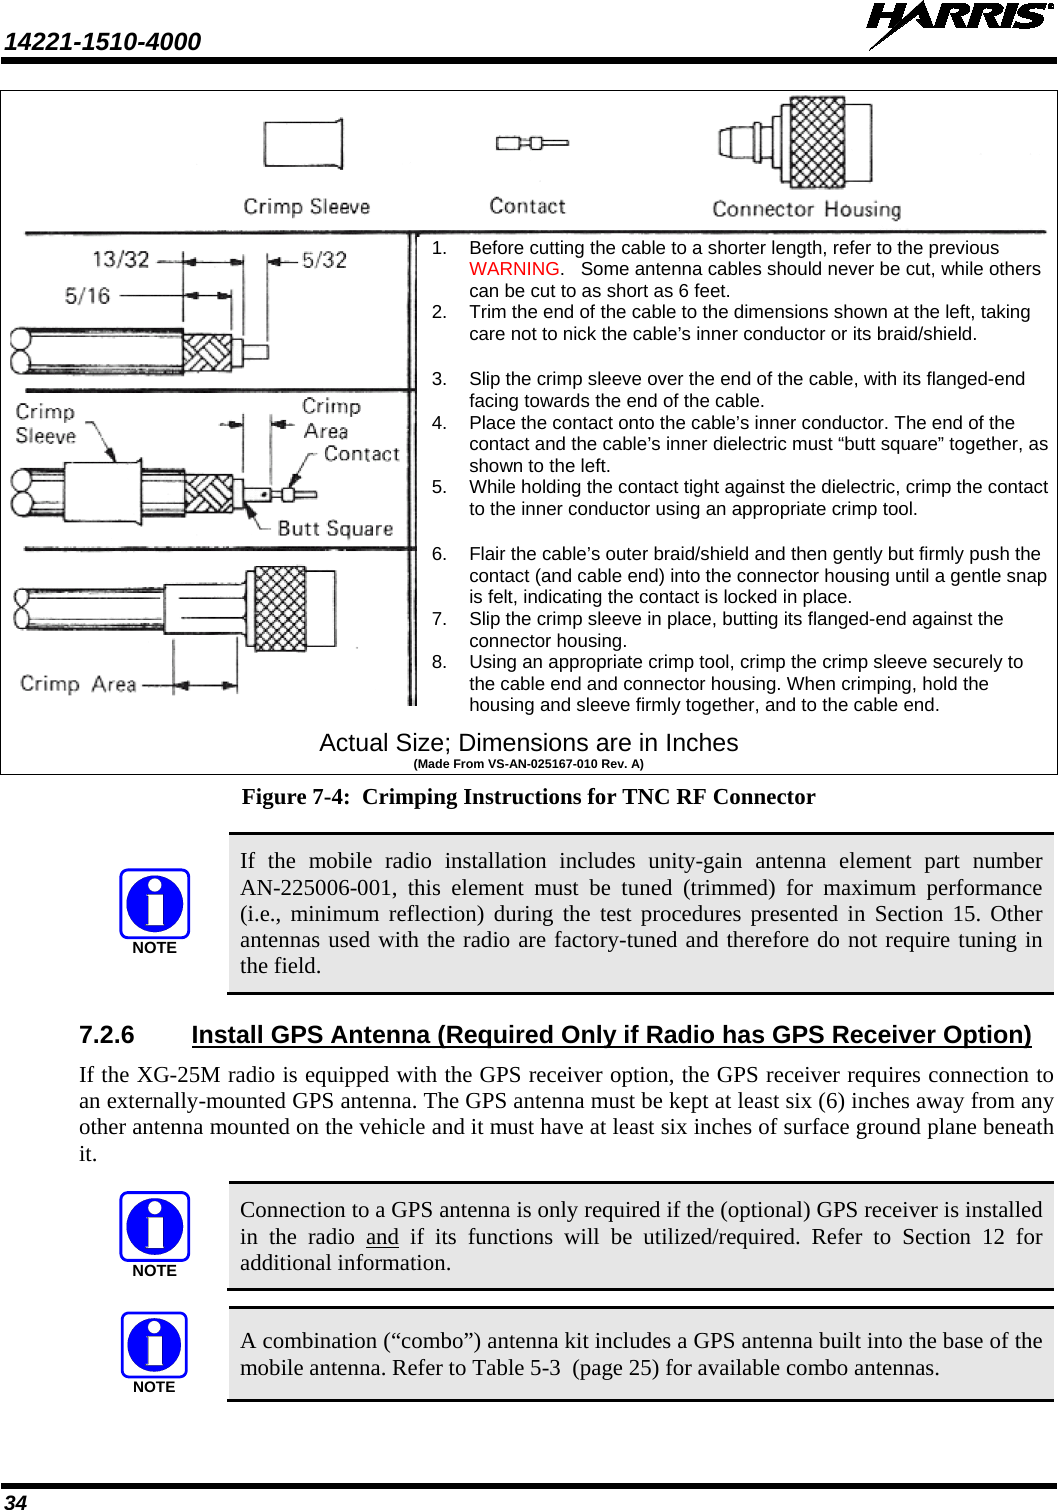 14221-1510-4000   34  Actual Size; Dimensions are in Inches (Made From VS-AN-025167-010 Rev. A) Figure 7-4:  Crimping Instructions for TNC RF Connector   If the mobile radio installation includes unity-gain  antenna element  part number AN-225006-001,  this  element  must be tuned (trimmed)  for maximum performance (i.e., minimum reflection) during the test procedures presented in Section 15. Other antennas used with the radio are factory-tuned and therefore do not require tuning in the field. 7.2.6 Install GPS Antenna (Required Only if Radio has GPS Receiver Option) If the XG-25M radio is equipped with the GPS receiver option, the GPS receiver requires connection to an externally-mounted GPS antenna. The GPS antenna must be kept at least six (6) inches away from any other antenna mounted on the vehicle and it must have at least six inches of surface ground plane beneath it.   Connection to a GPS antenna is only required if the (optional) GPS receiver is installed in the radio and if its functions will be utilized/required. Refer to Section 12 for additional information.   A combination (“combo”) antenna kit includes a GPS antenna built into the base of the mobile antenna. Refer to Table 5-3  (page 25) for available combo antennas. NOTENOTENOTE1. Before cutting the cable to a shorter length, refer to the previous WARNING.   Some antenna cables should never be cut, while others can be cut to as short as 6 feet. 2. Trim the end of the cable to the dimensions shown at the left, taking care not to nick the cable’s inner conductor or its braid/shield.  3. Slip the crimp sleeve over the end of the cable, with its flanged-end facing towards the end of the cable. 4. Place the contact onto the cable’s inner conductor. The end of the contact and the cable’s inner dielectric must “butt square” together, as shown to the left. 5. While holding the contact tight against the dielectric, crimp the contact to the inner conductor using an appropriate crimp tool.  6. Flair the cable’s outer braid/shield and then gently but firmly push the contact (and cable end) into the connector housing until a gentle snap is felt, indicating the contact is locked in place. 7. Slip the crimp sleeve in place, butting its flanged-end against the connector housing. 8. Using an appropriate crimp tool, crimp the crimp sleeve securely to the cable end and connector housing. When crimping, hold the housing and sleeve firmly together, and to the cable end. 